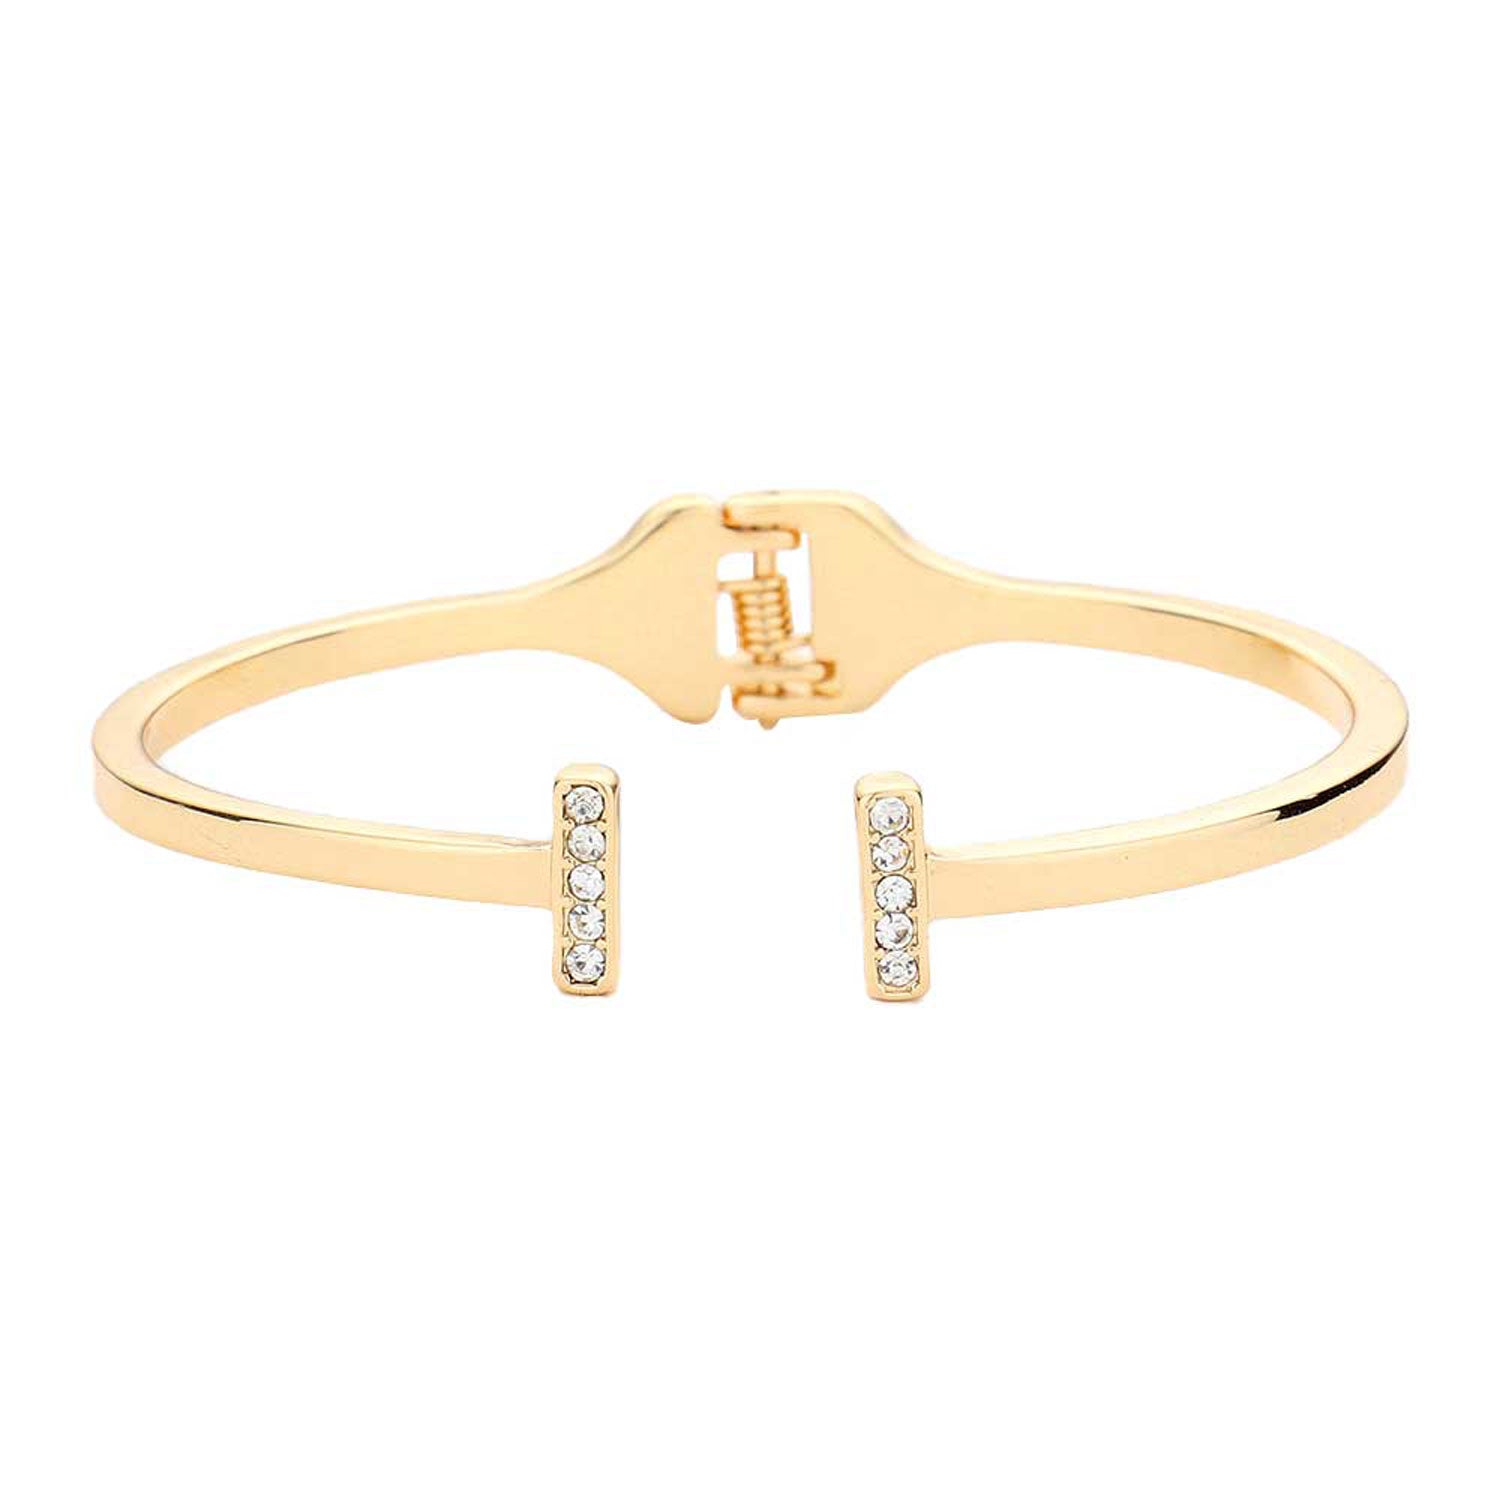 Gold Rhinestone Embellished Metal Rectangle Cuff Bracelet, put on a pop of color to complete your ensemble. Perfect for adding just the right amount of shimmer & shine and a touch of class to special events. Perfect Birthday Gift, Anniversary Gift, Mother's Day Gift, Graduation Gift, Valentine’s Gift.